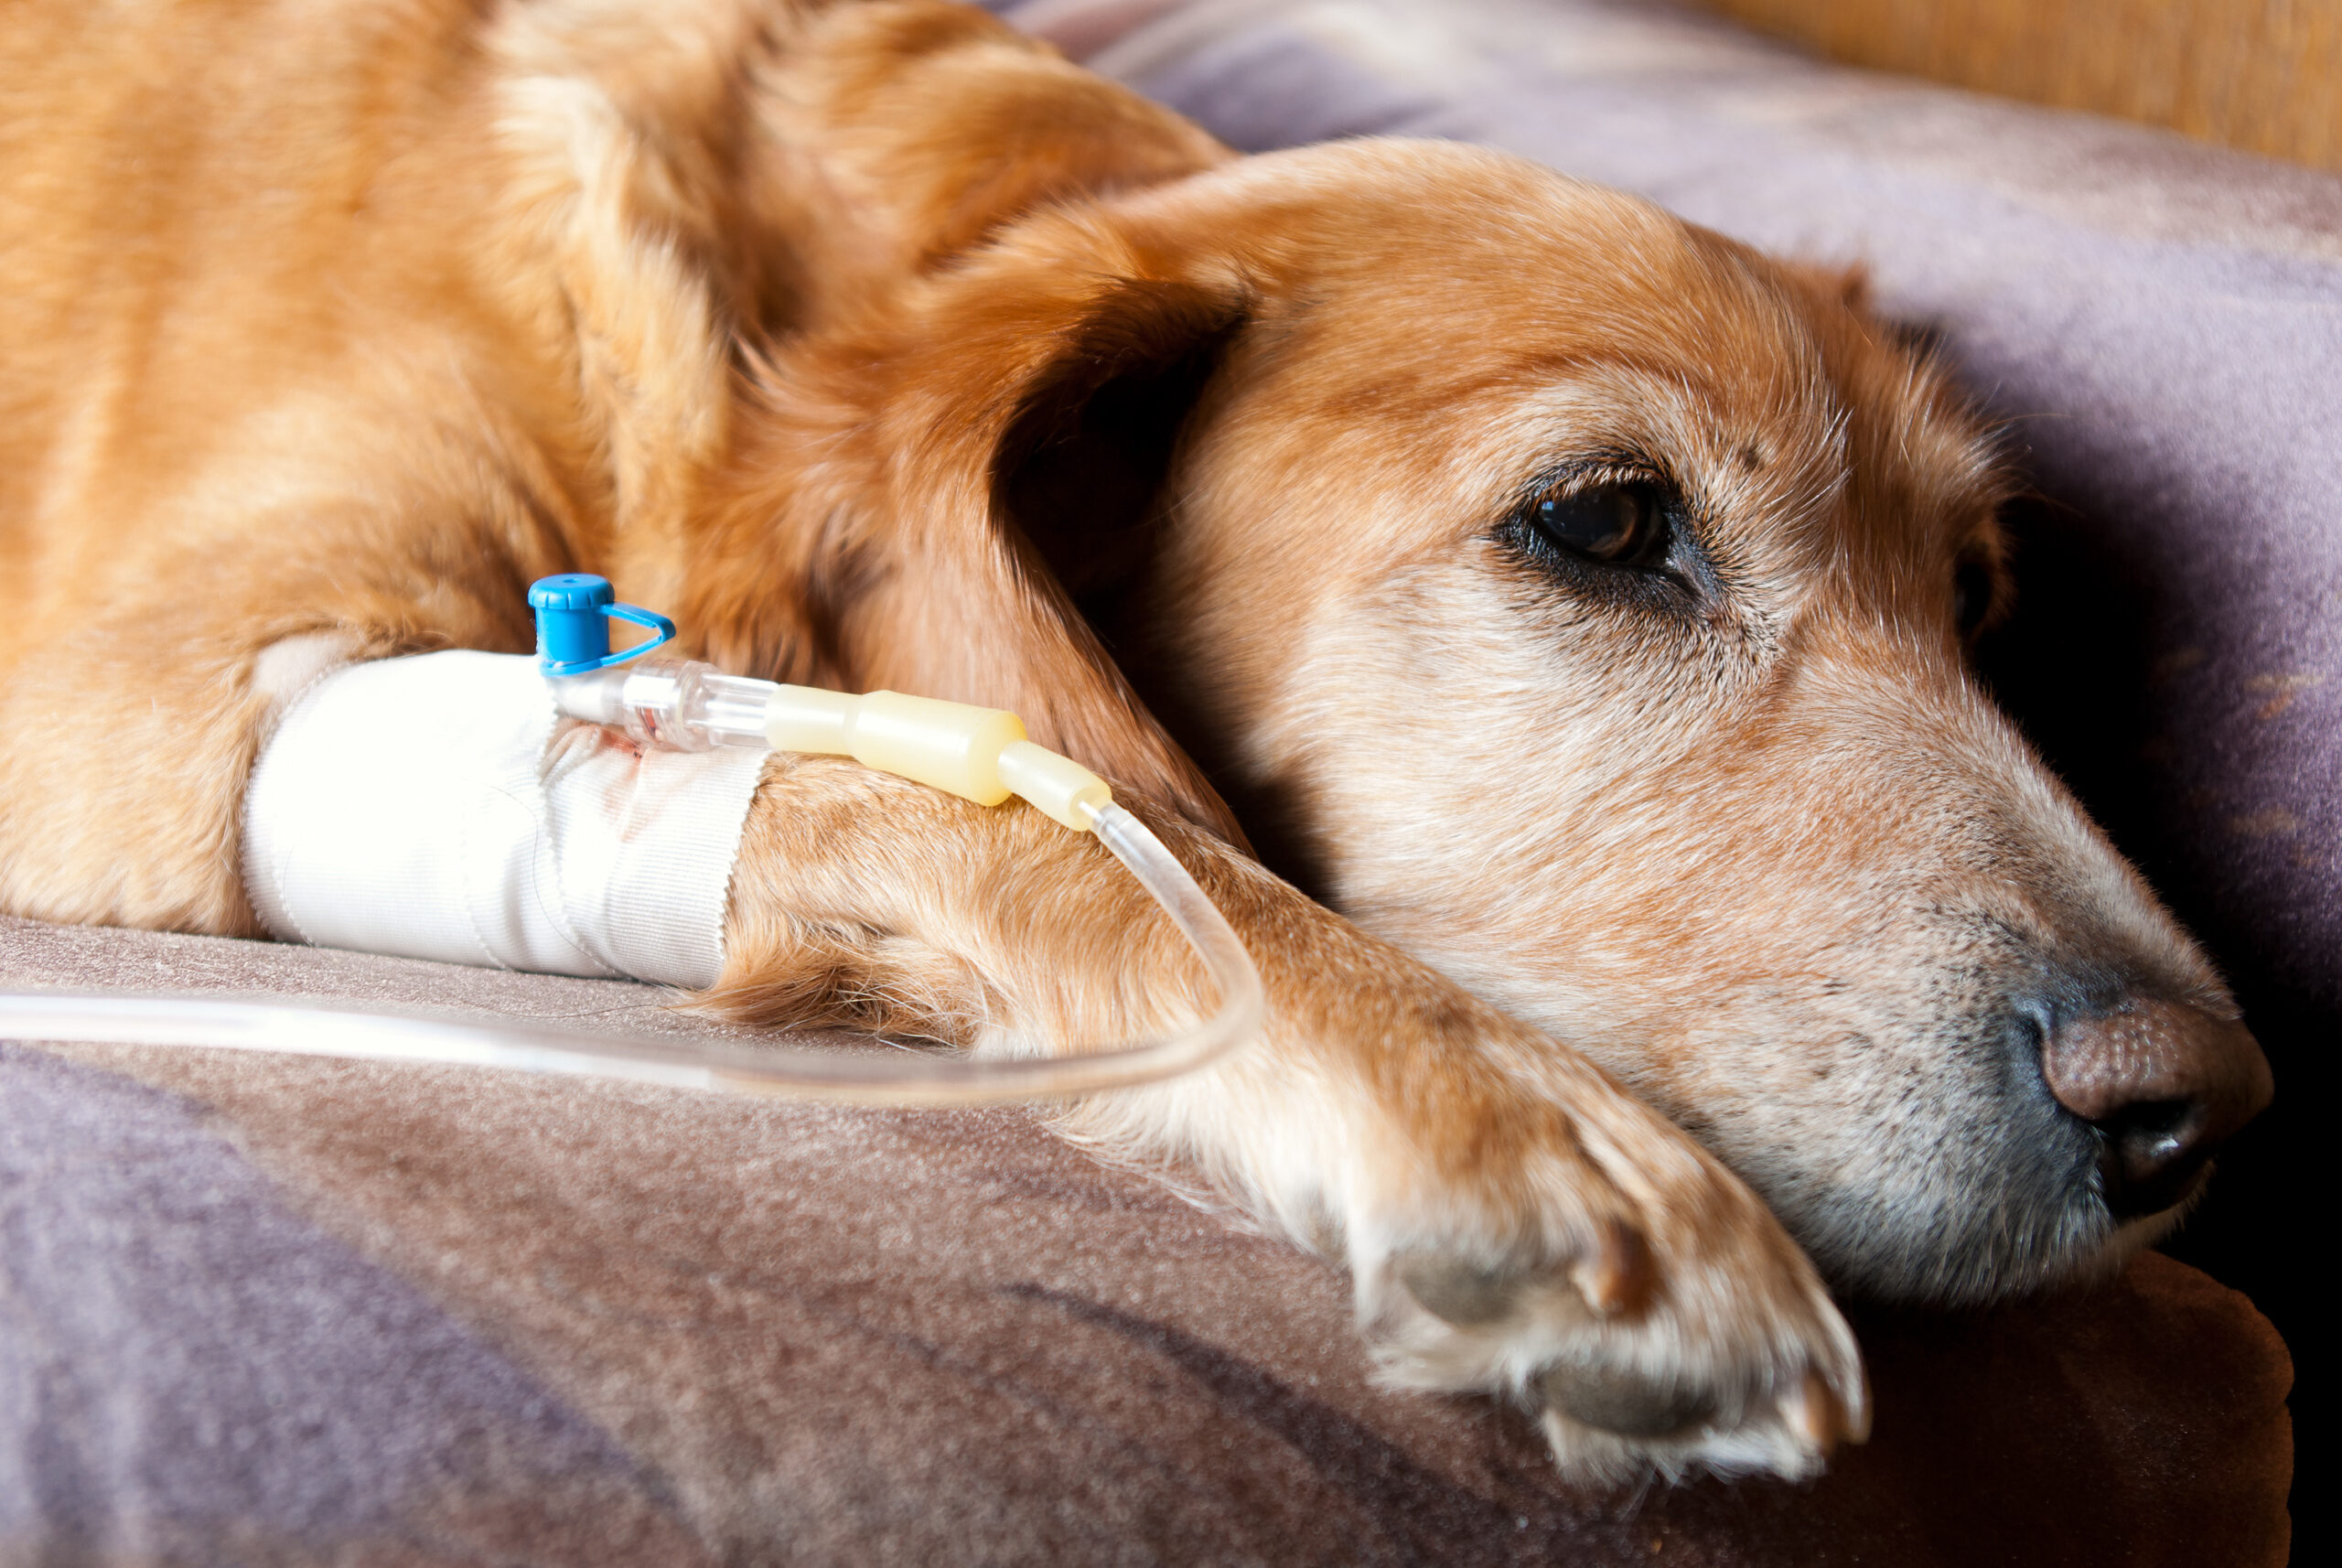 Dog lying on bed with cannula in vein